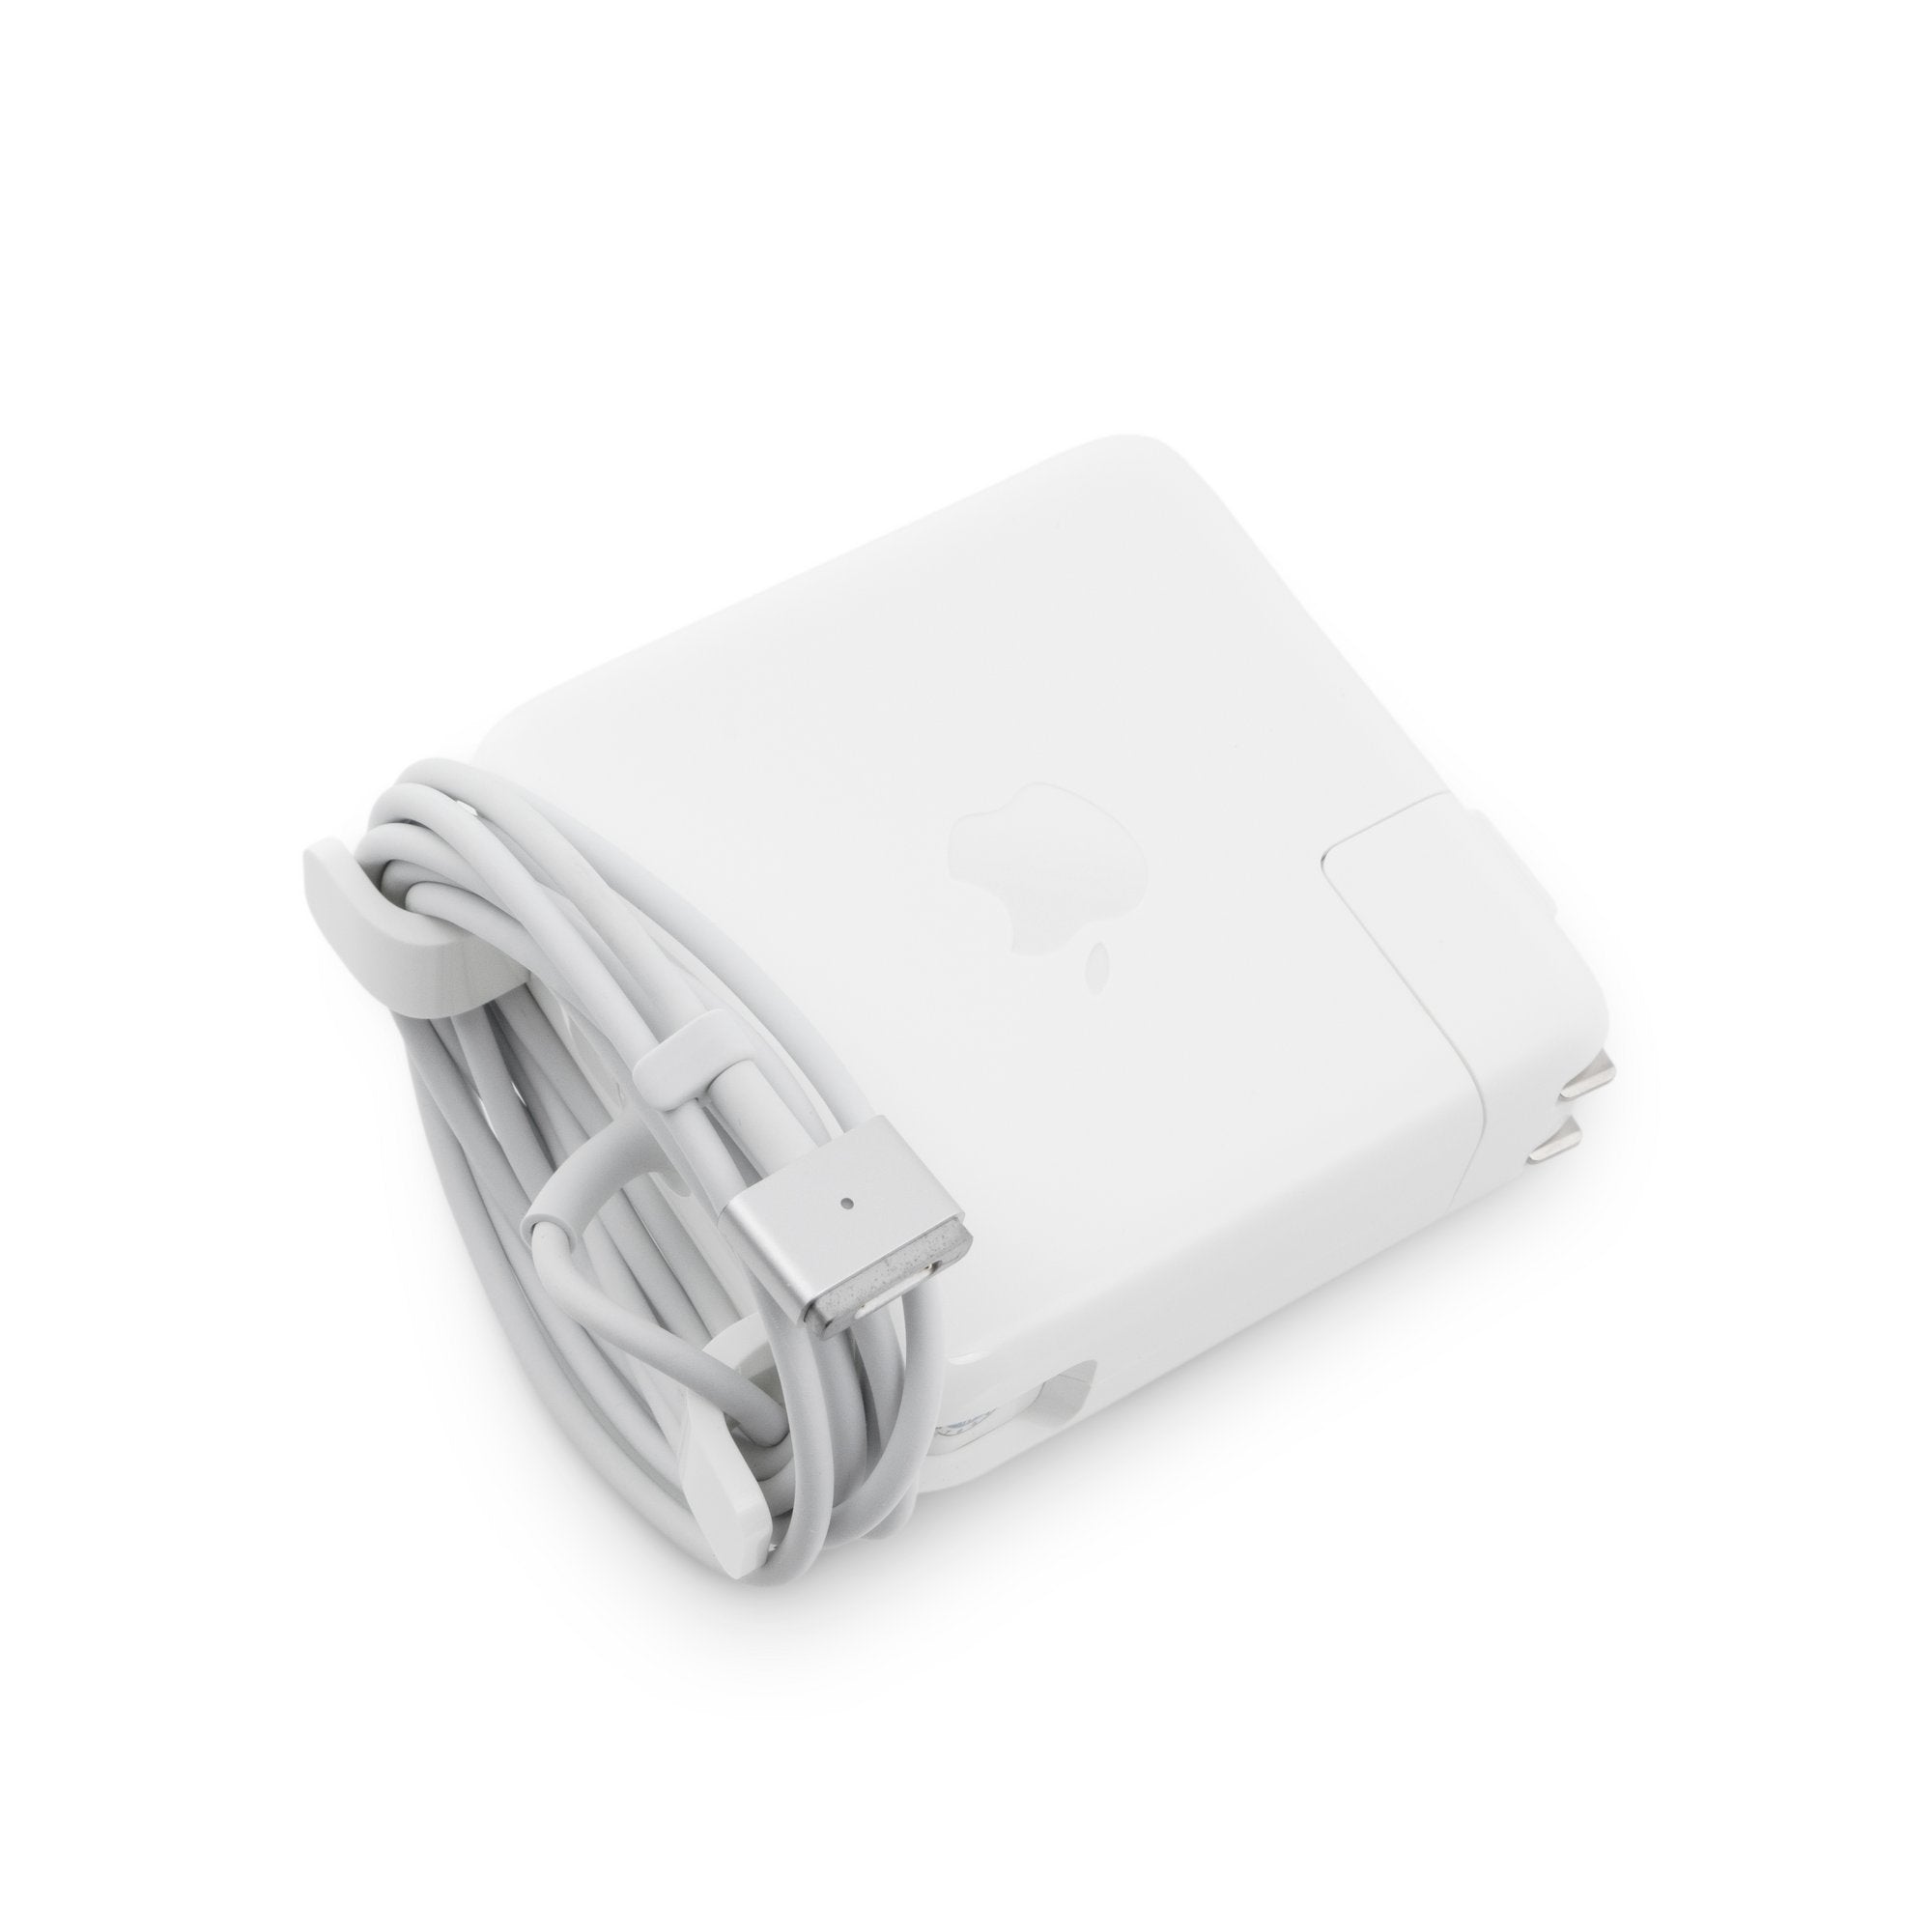 Apple Mac Charger - MacBook Pro R etina Late 2013 Charger (For parts)